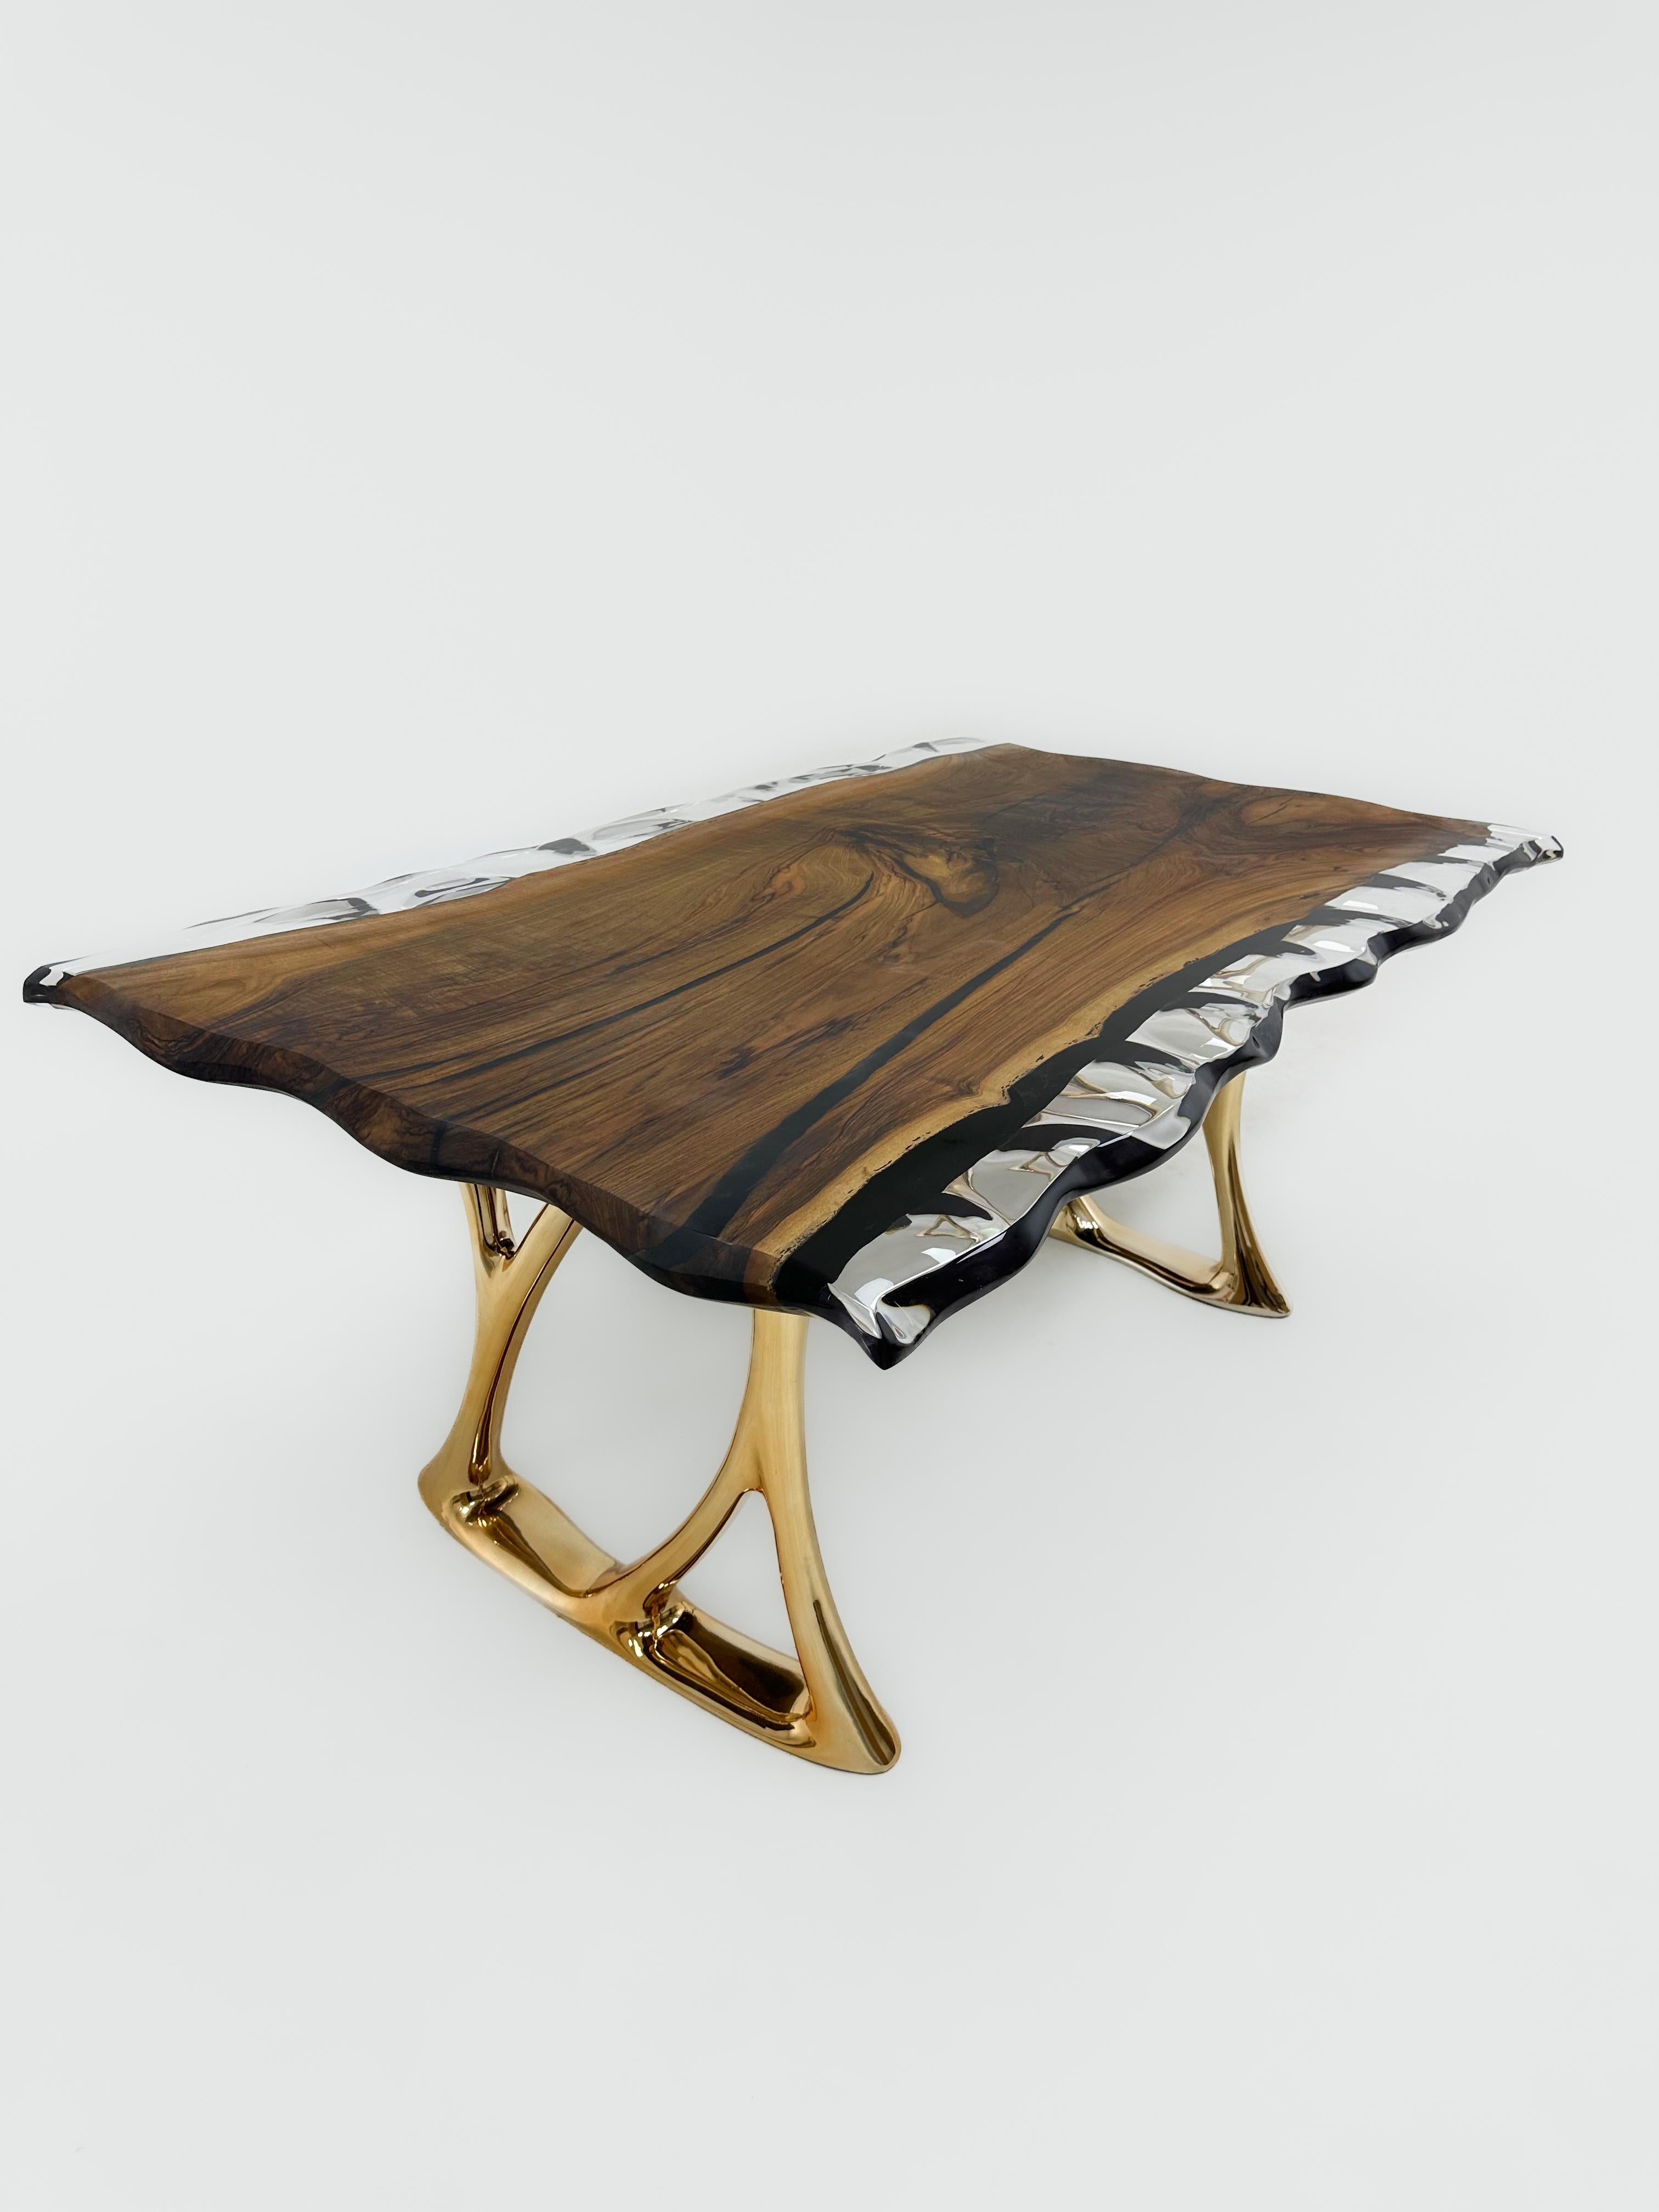 Carved Custom Clear Epoxy Resin Walnut Wood Dining Table - Natural Wood Table For Sale